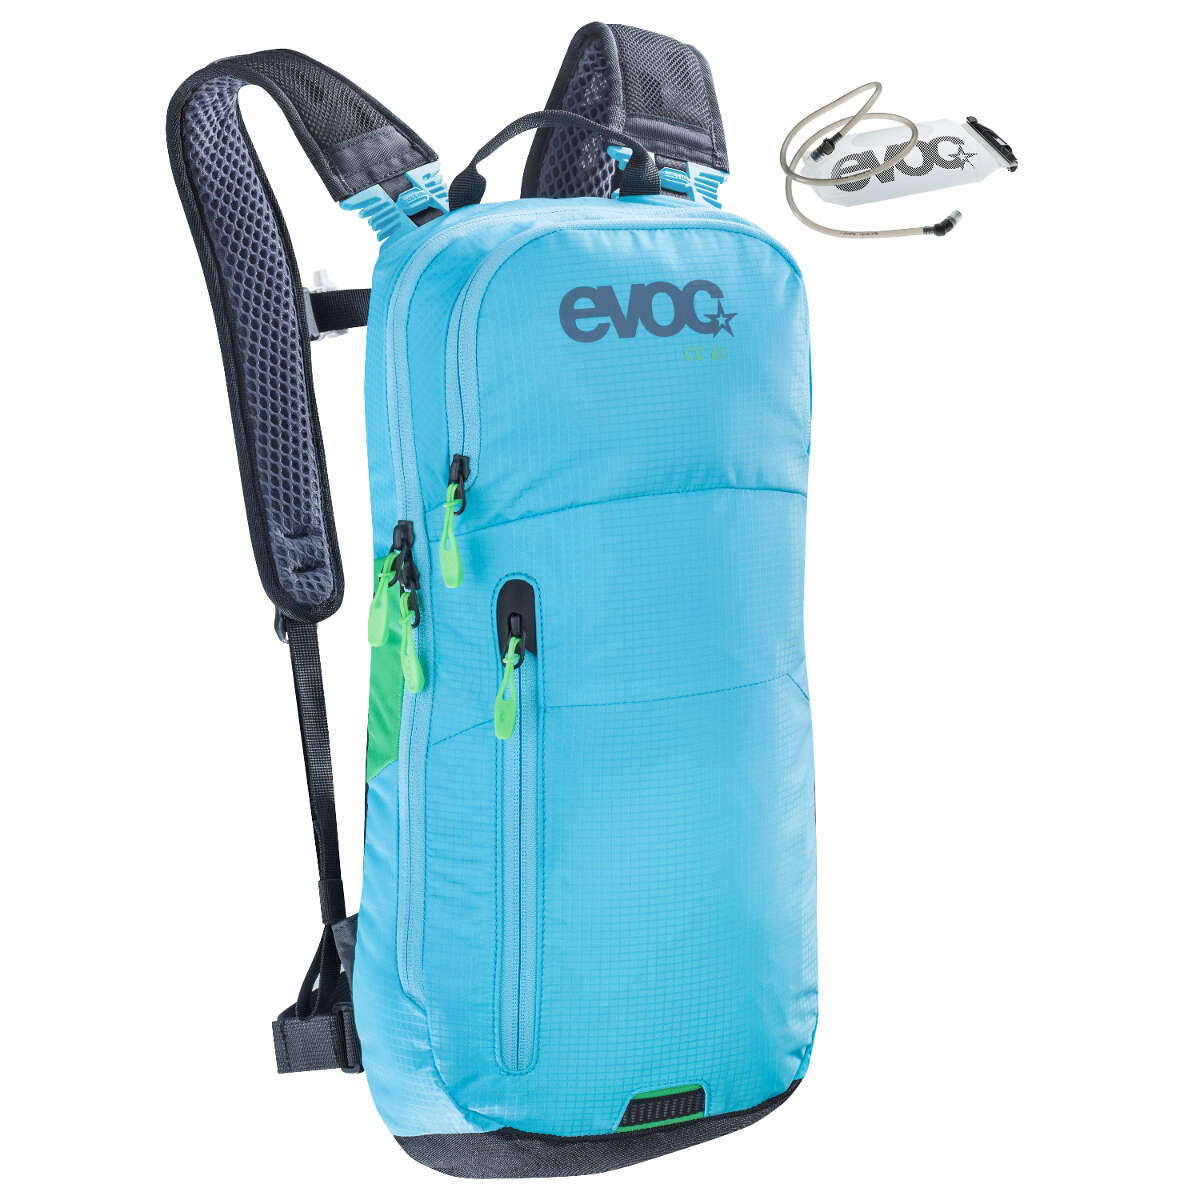 Evoc Backpack with Hydration System Cross Country Neon Blue, 6 + 2 Liter